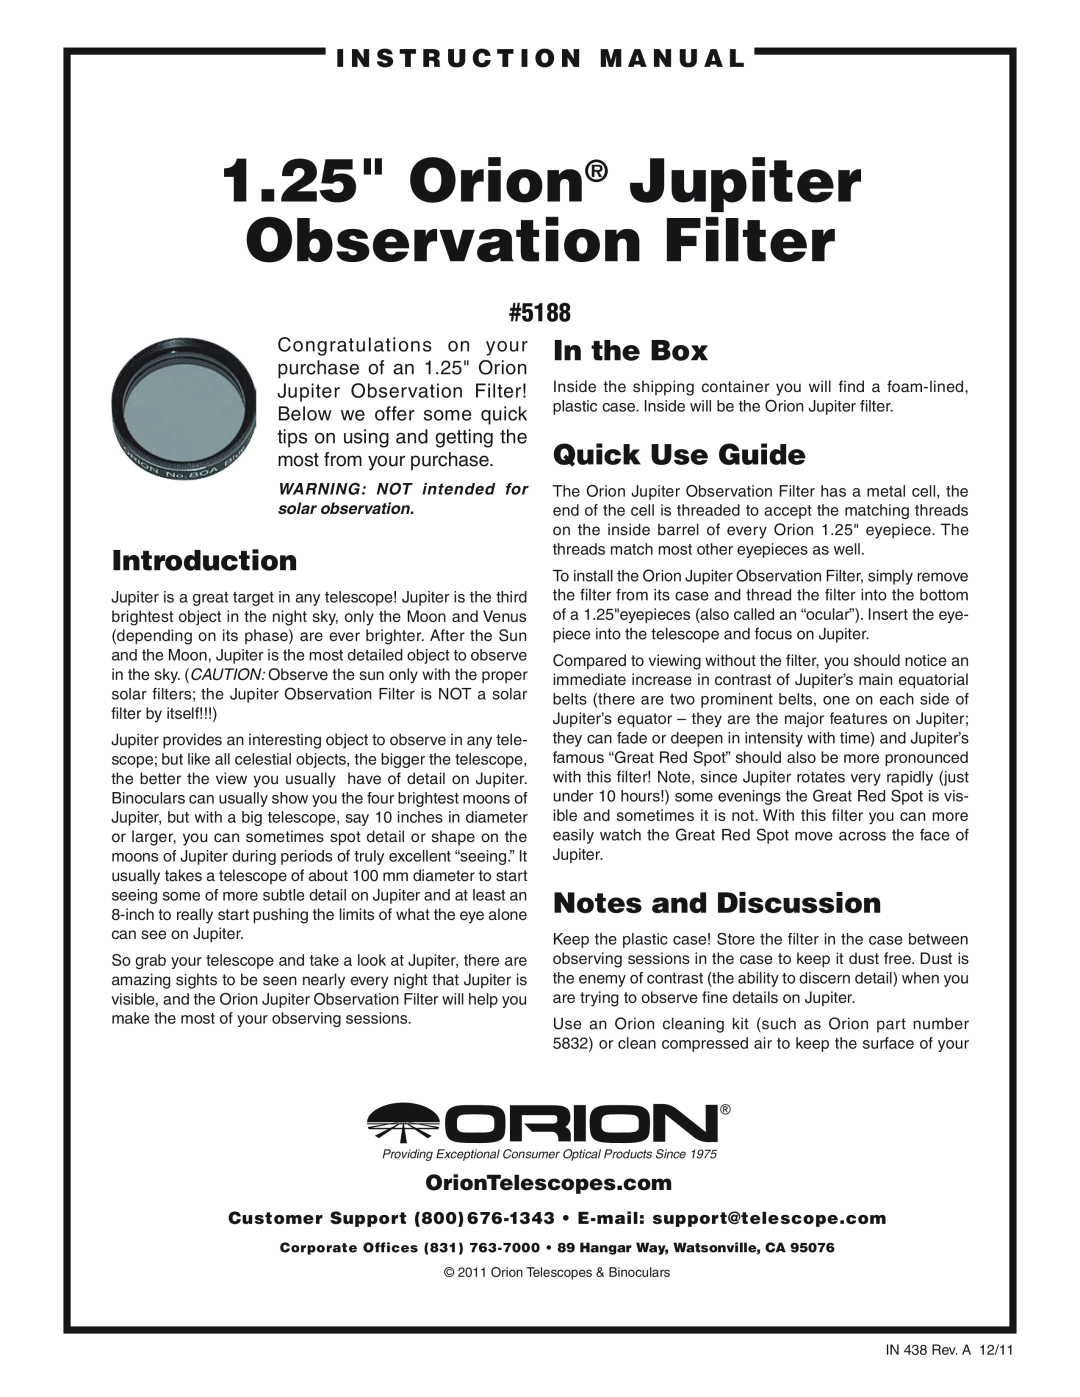 Orion instruction manual i n s t r u c t i o n M a n u a l, #5188, OrionTelescopes.com, Introduction, In the Box 